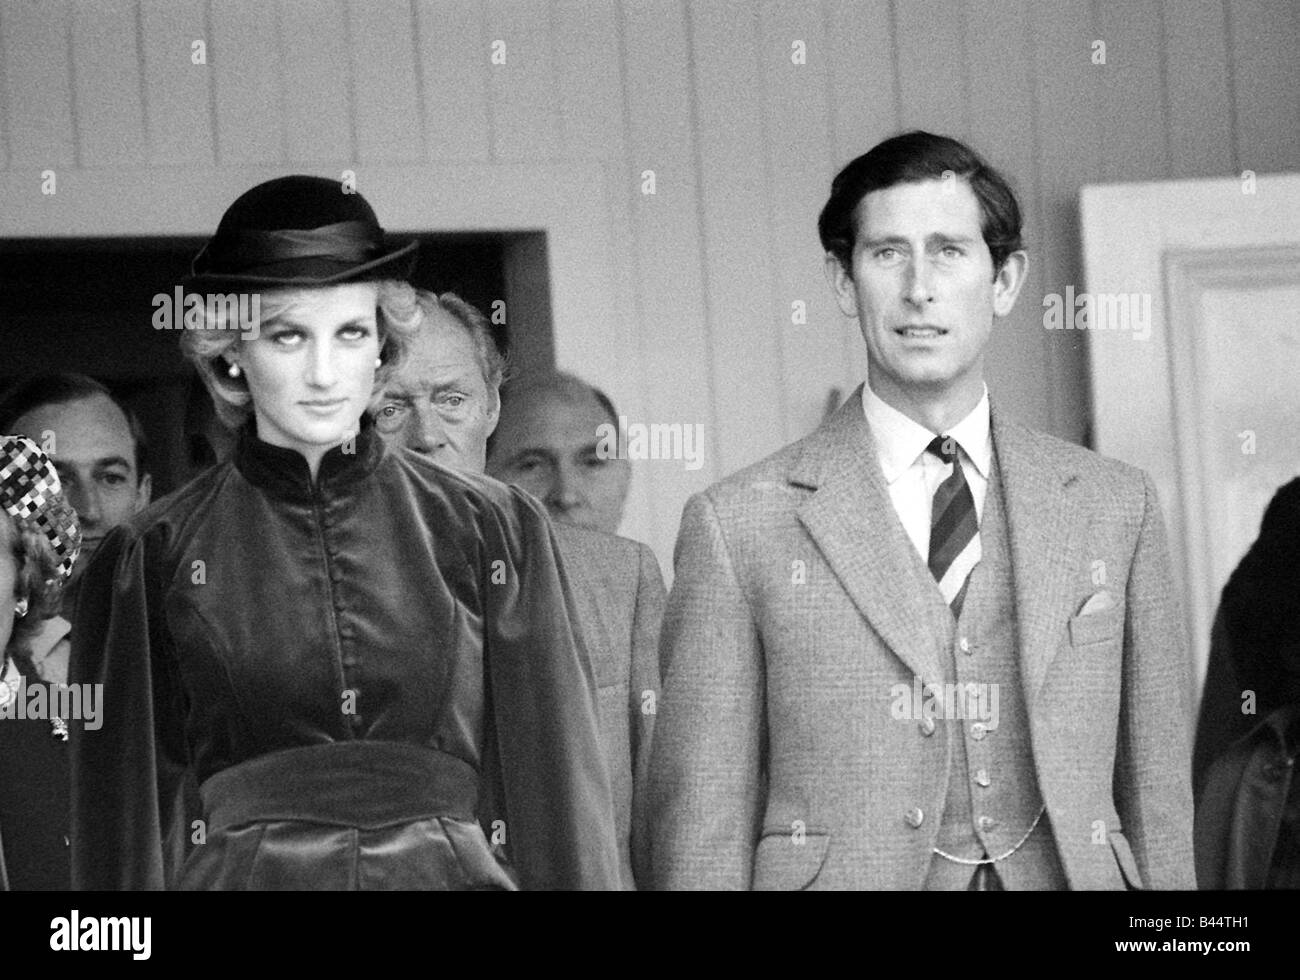 Prince Charles and Princess Diana September 1983 Royalty at the Braemar for the Highland games Stock Photo